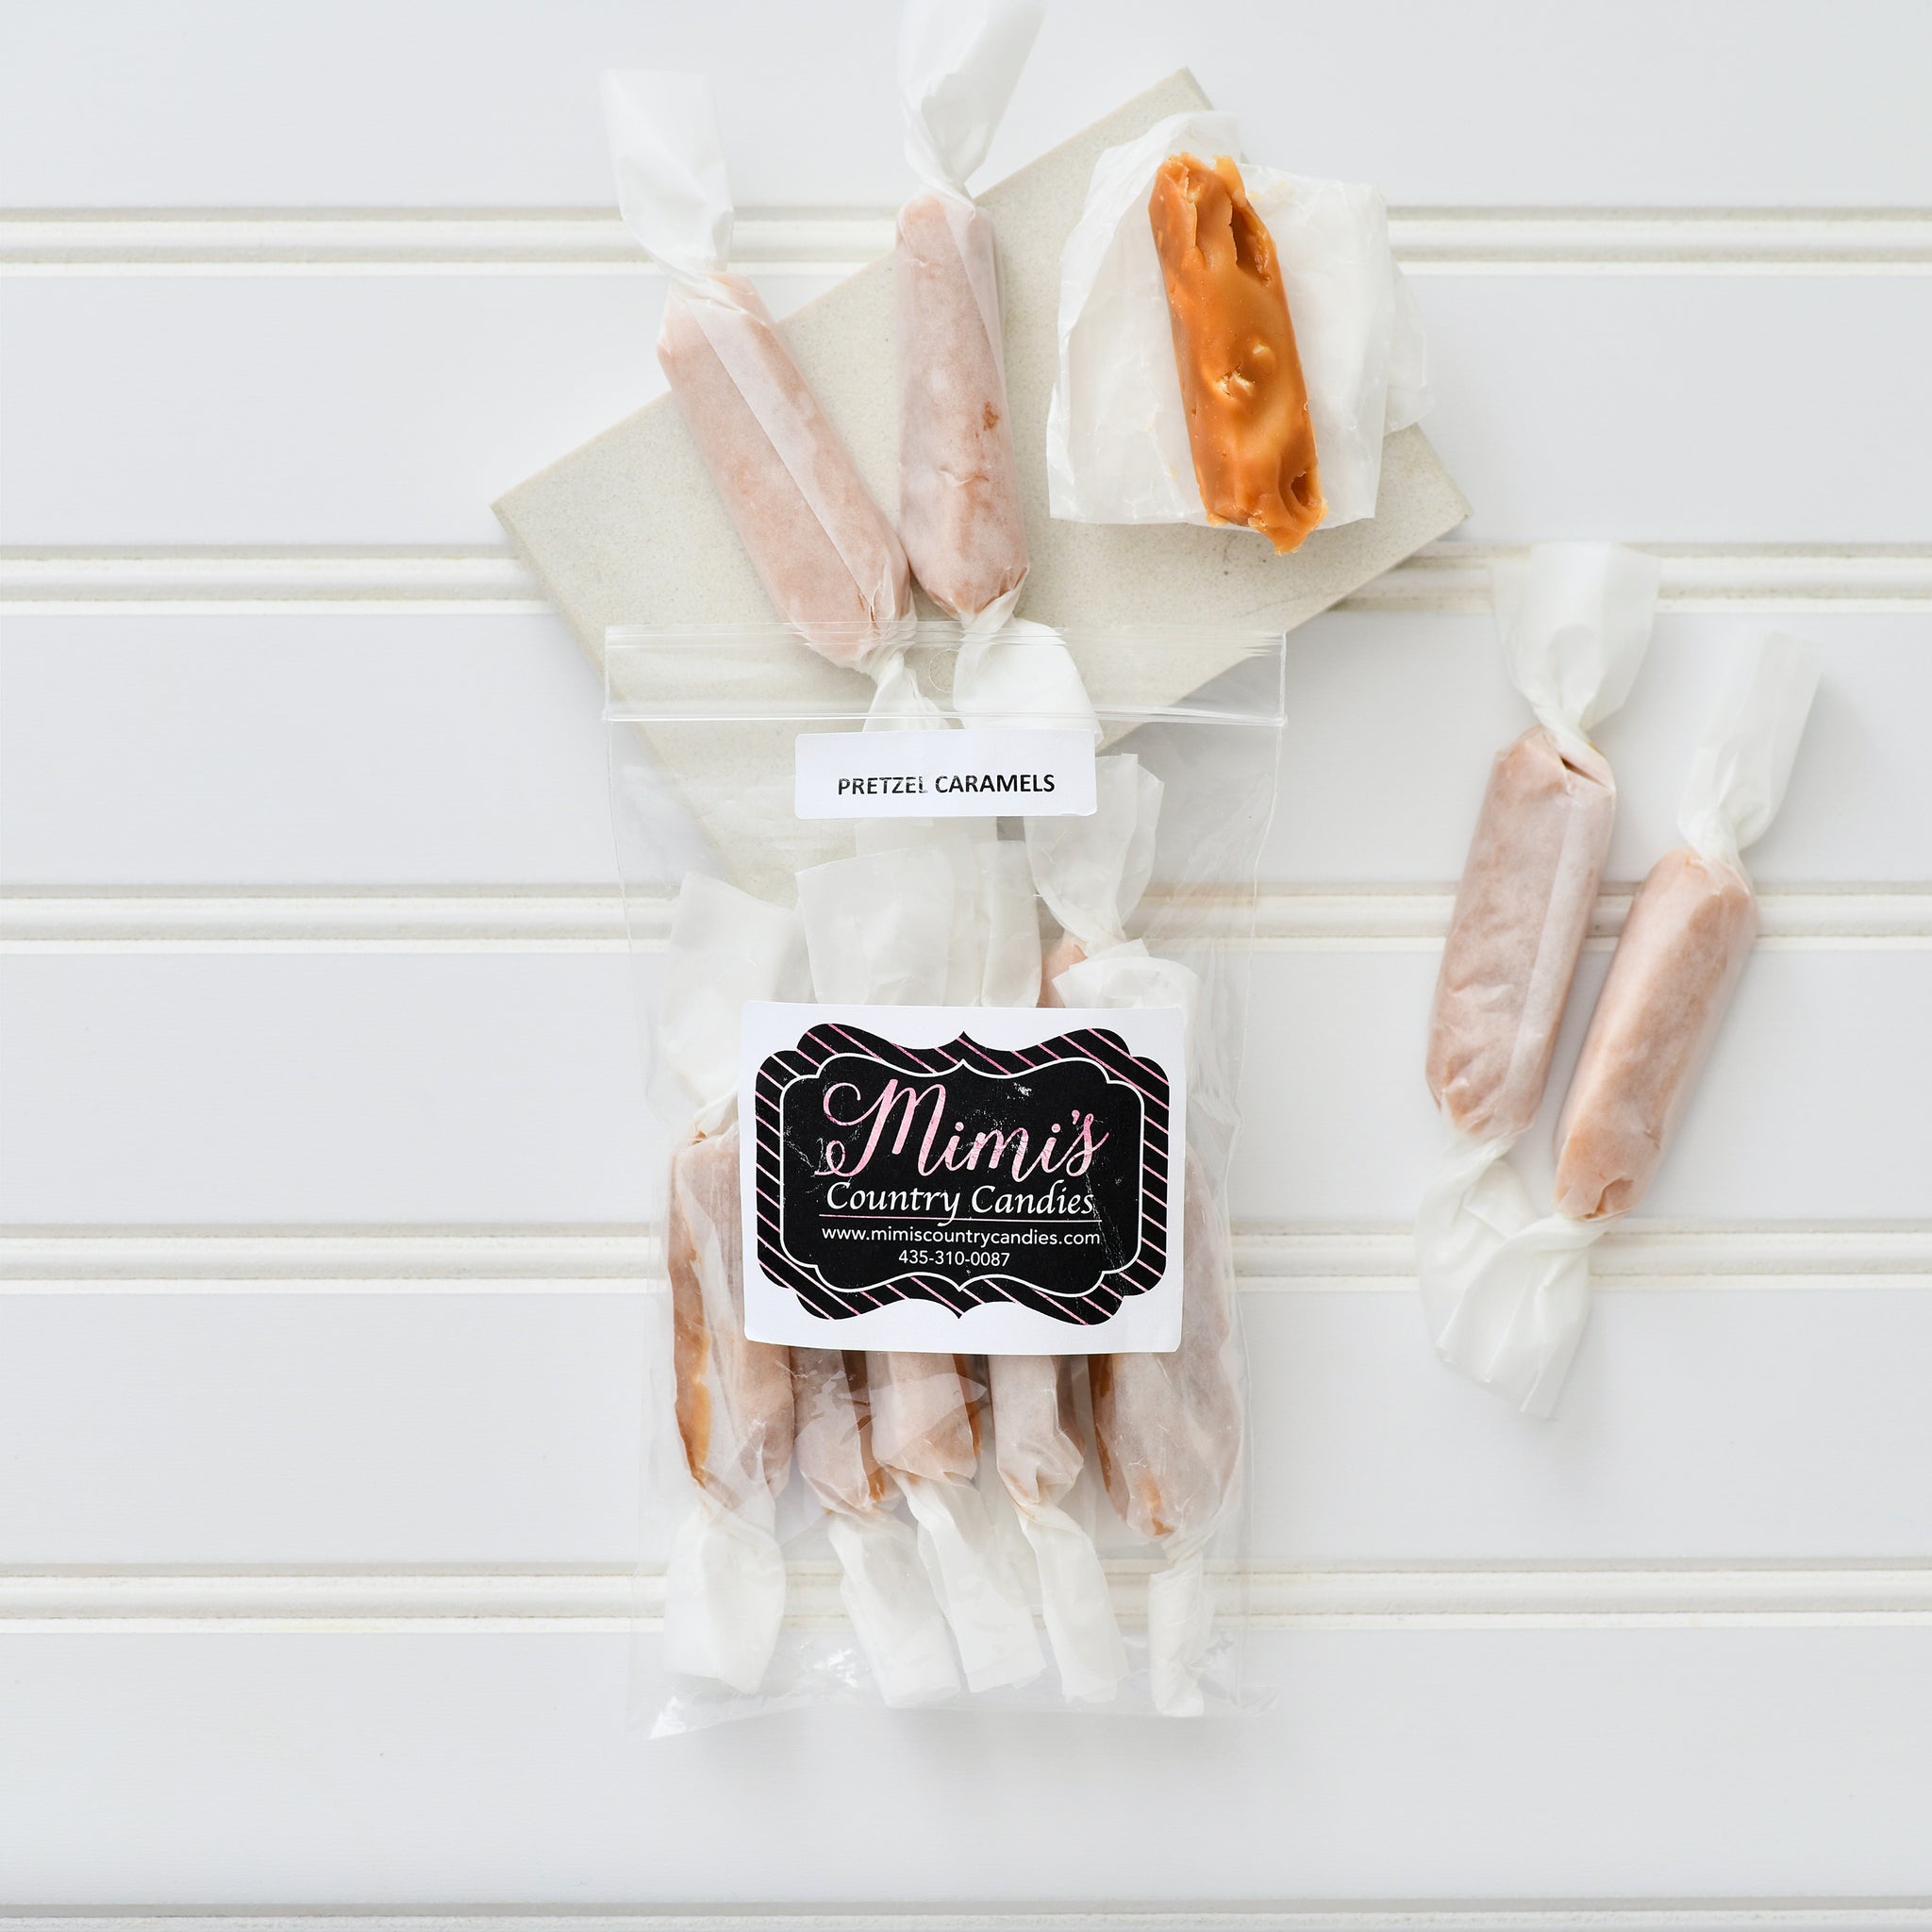 Mimi's Country Candies Buttered Pretzel Caramels